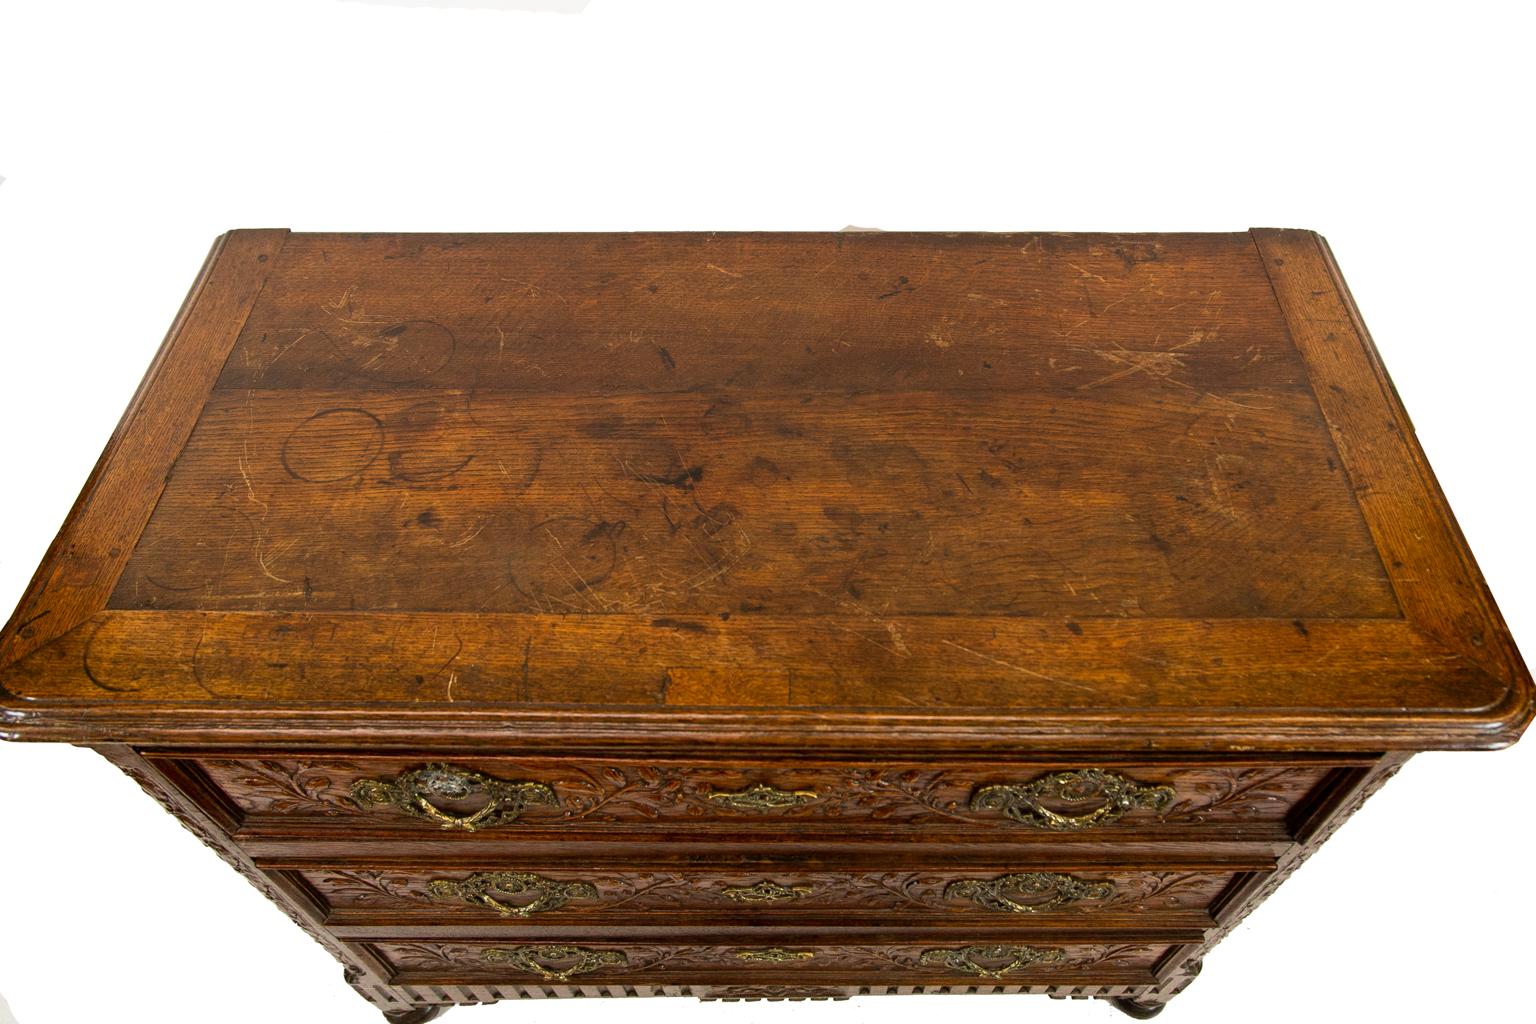 Carved French three-drawer commode, the drawers carved in high relief with leaf and berry carvings. The base apron is fluted and has carved tassels. The sides are raised paneled, while the front and back corners have leaf and berry carvings, on